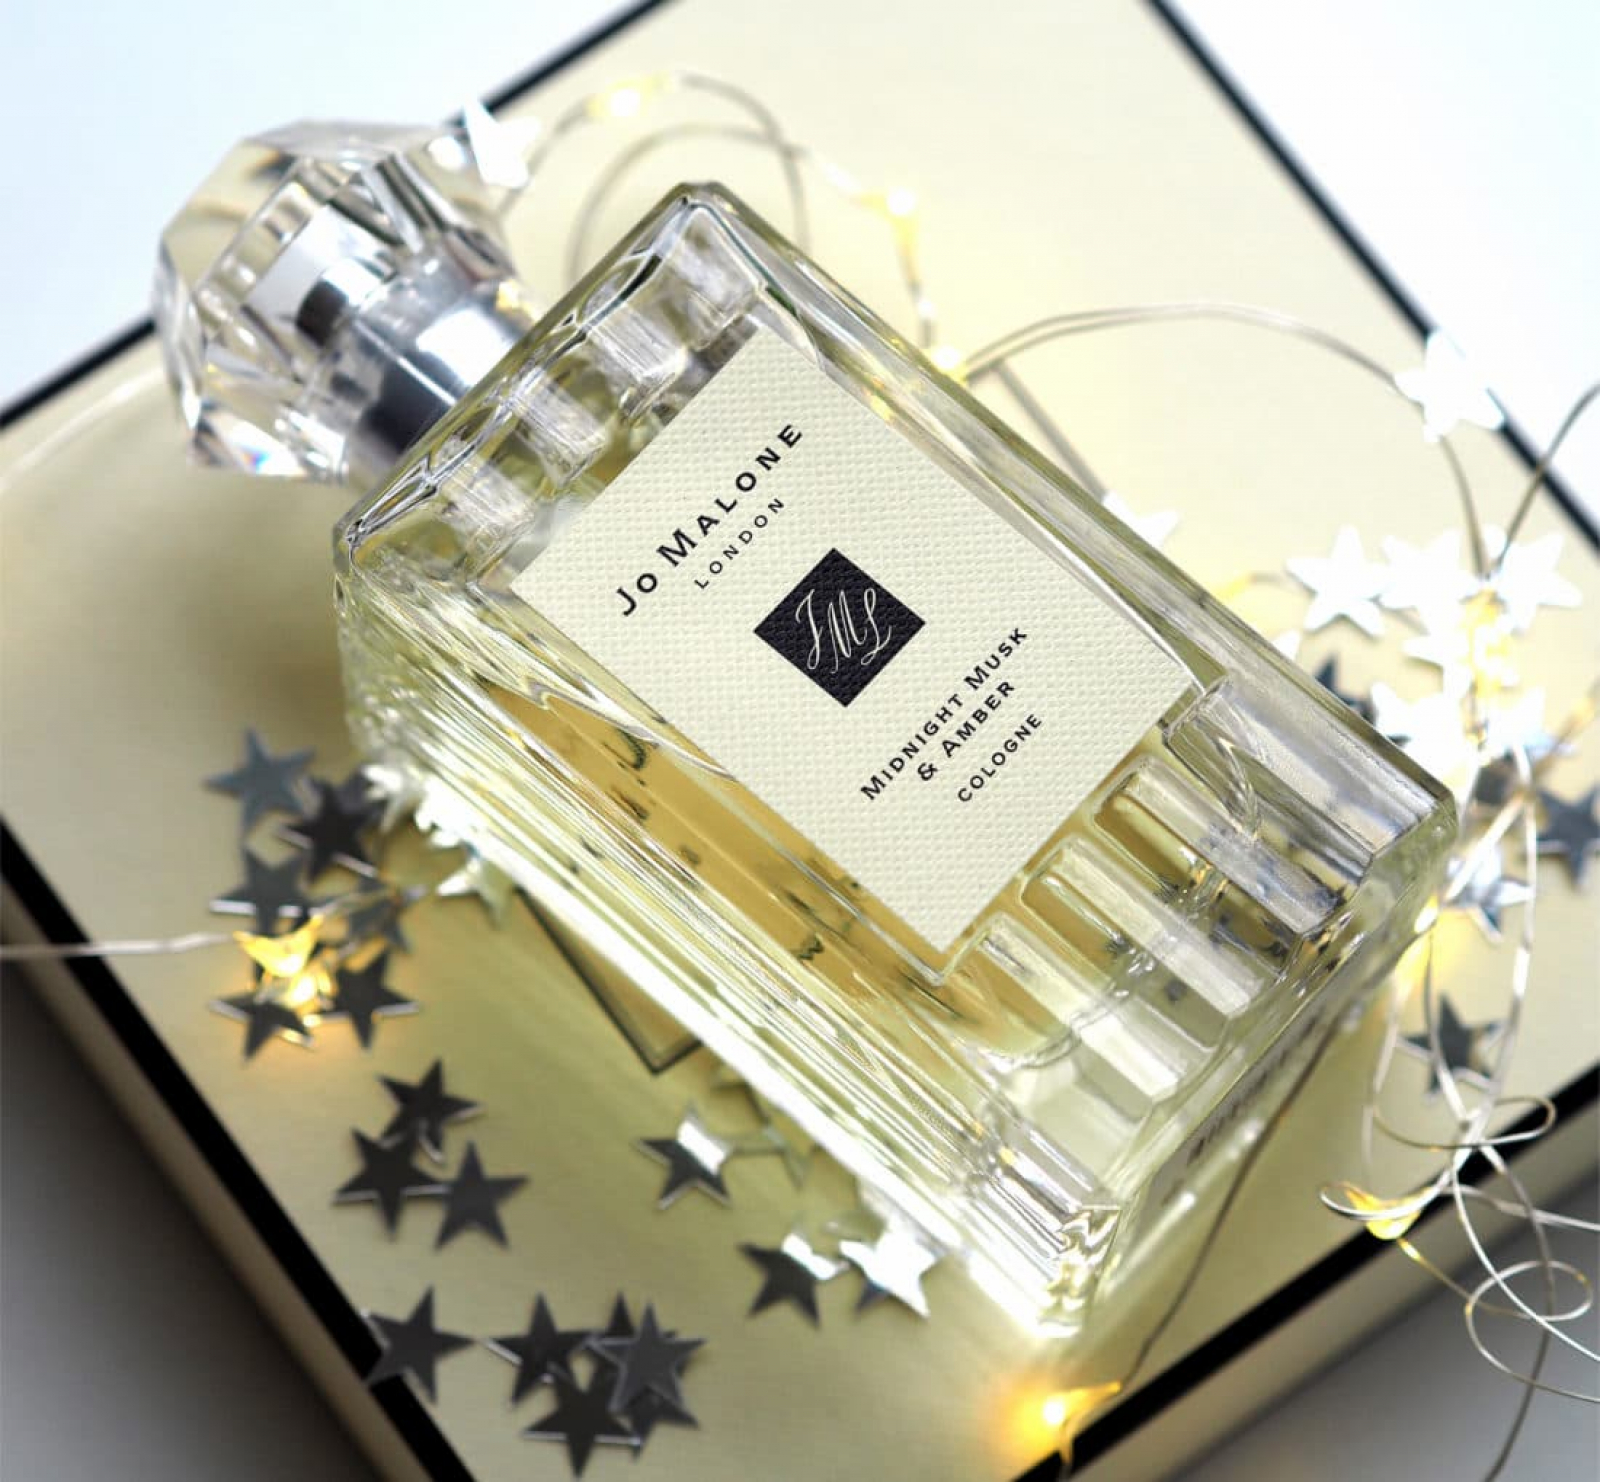 Nước Hoa Jo malone Midnight Musk & Amber Limited Cologne